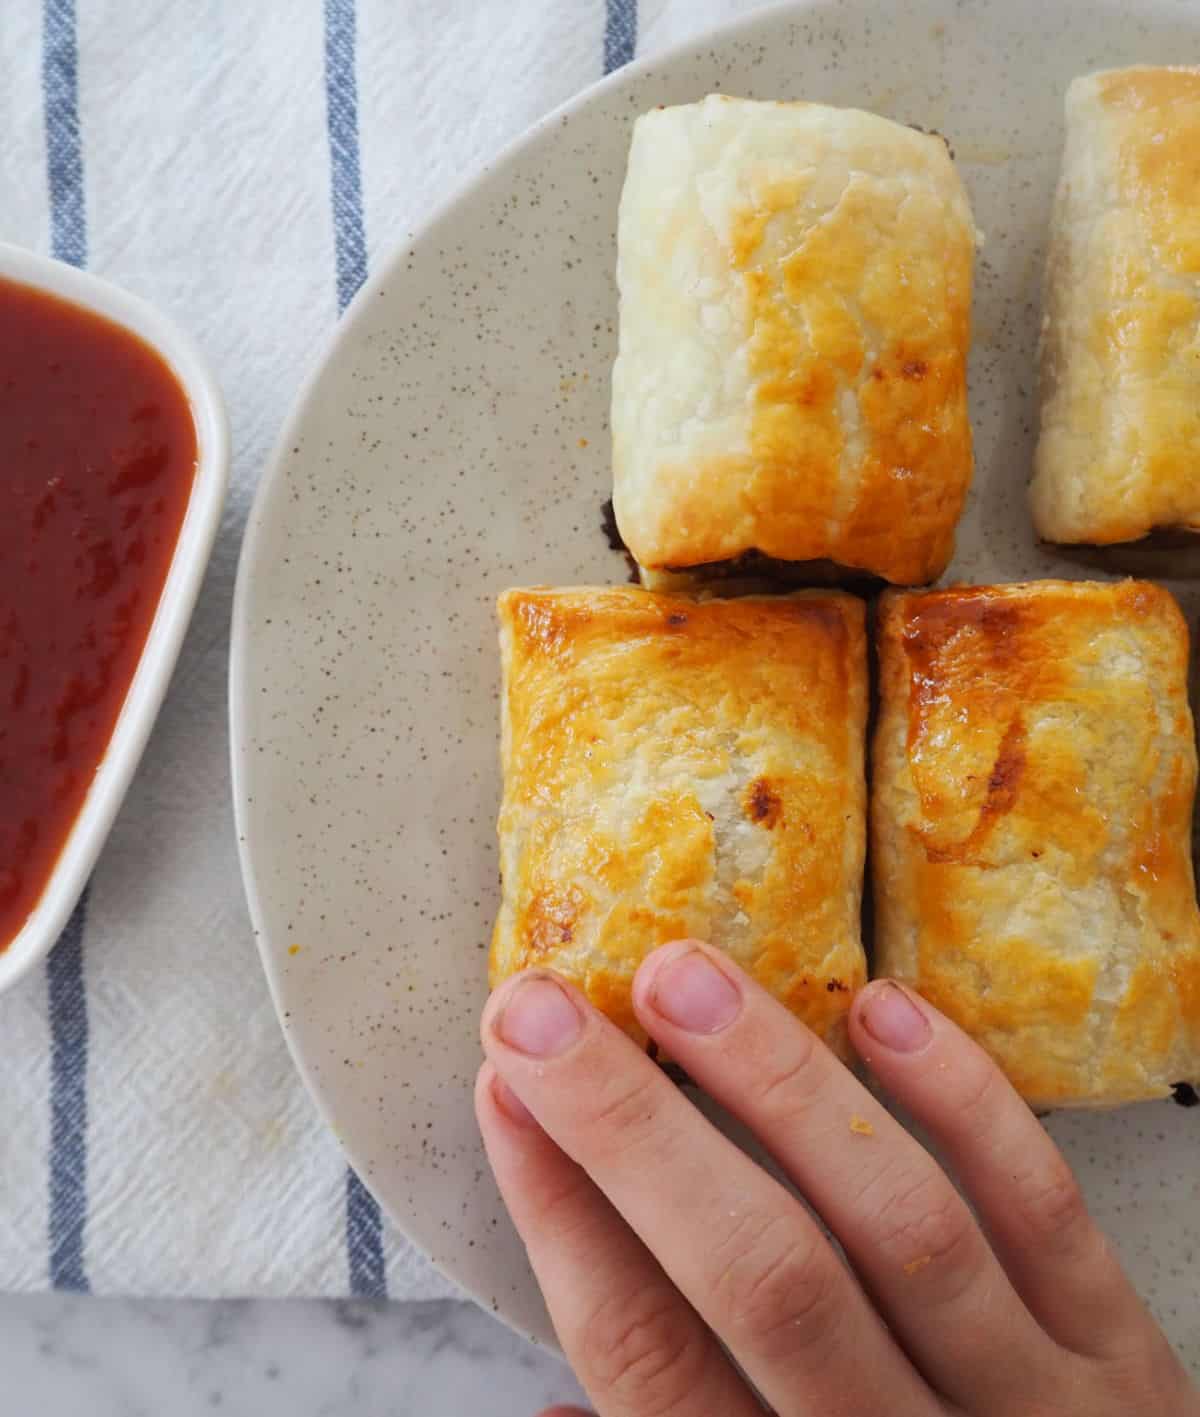 Child's hand reaching for sausage roll on a plate